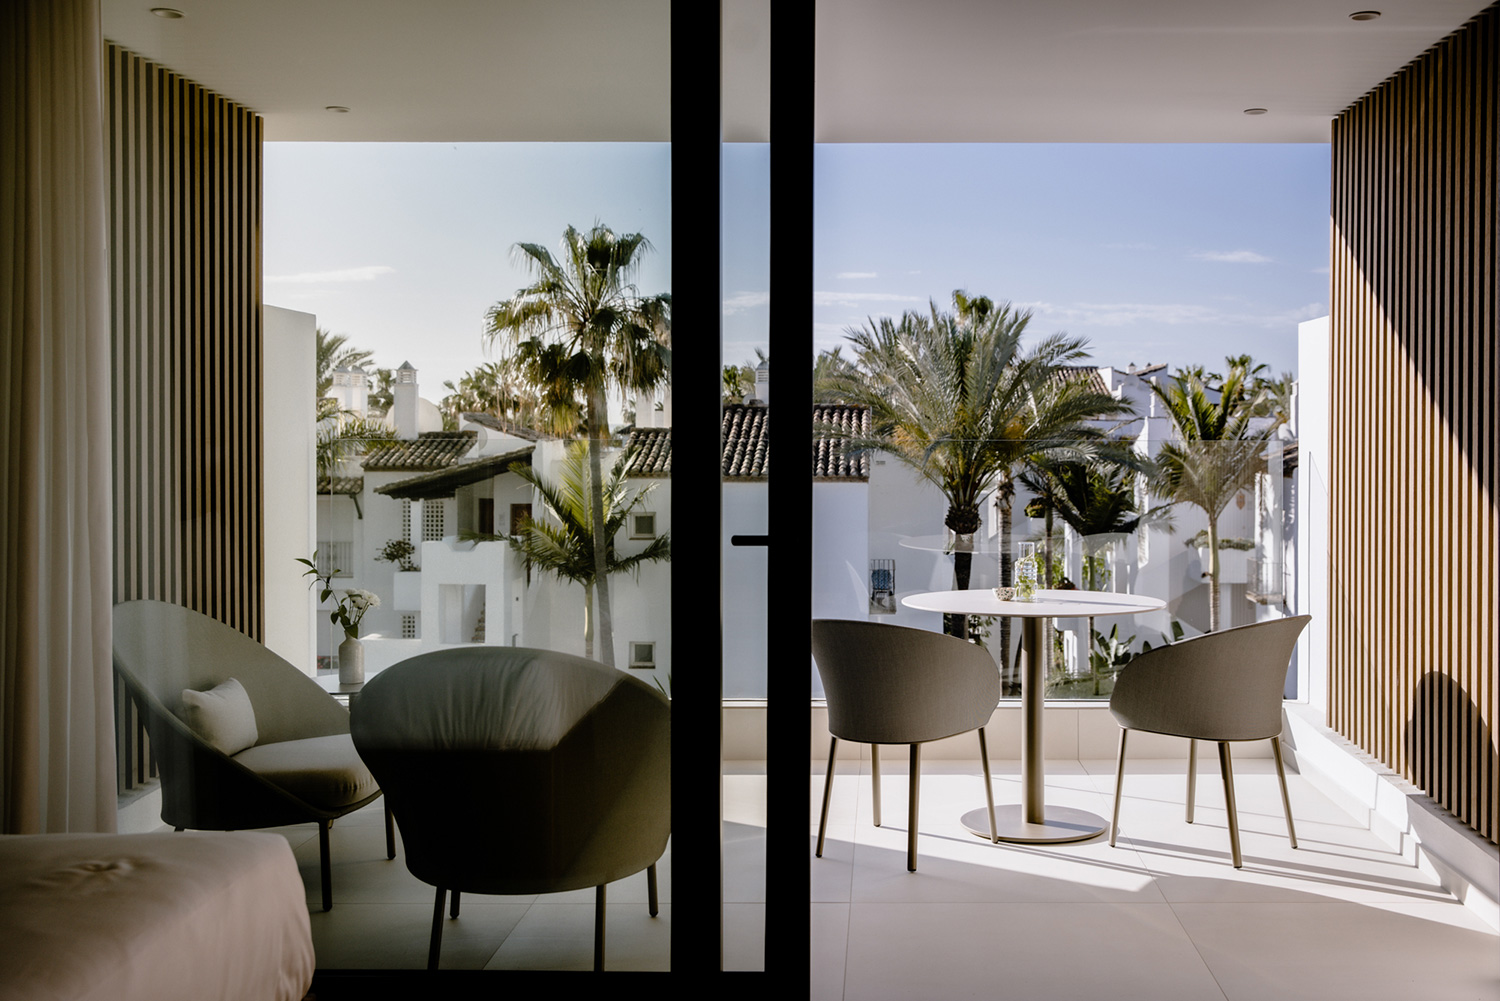 projects - outdoor - outdoor love stories: the flag costa del sol